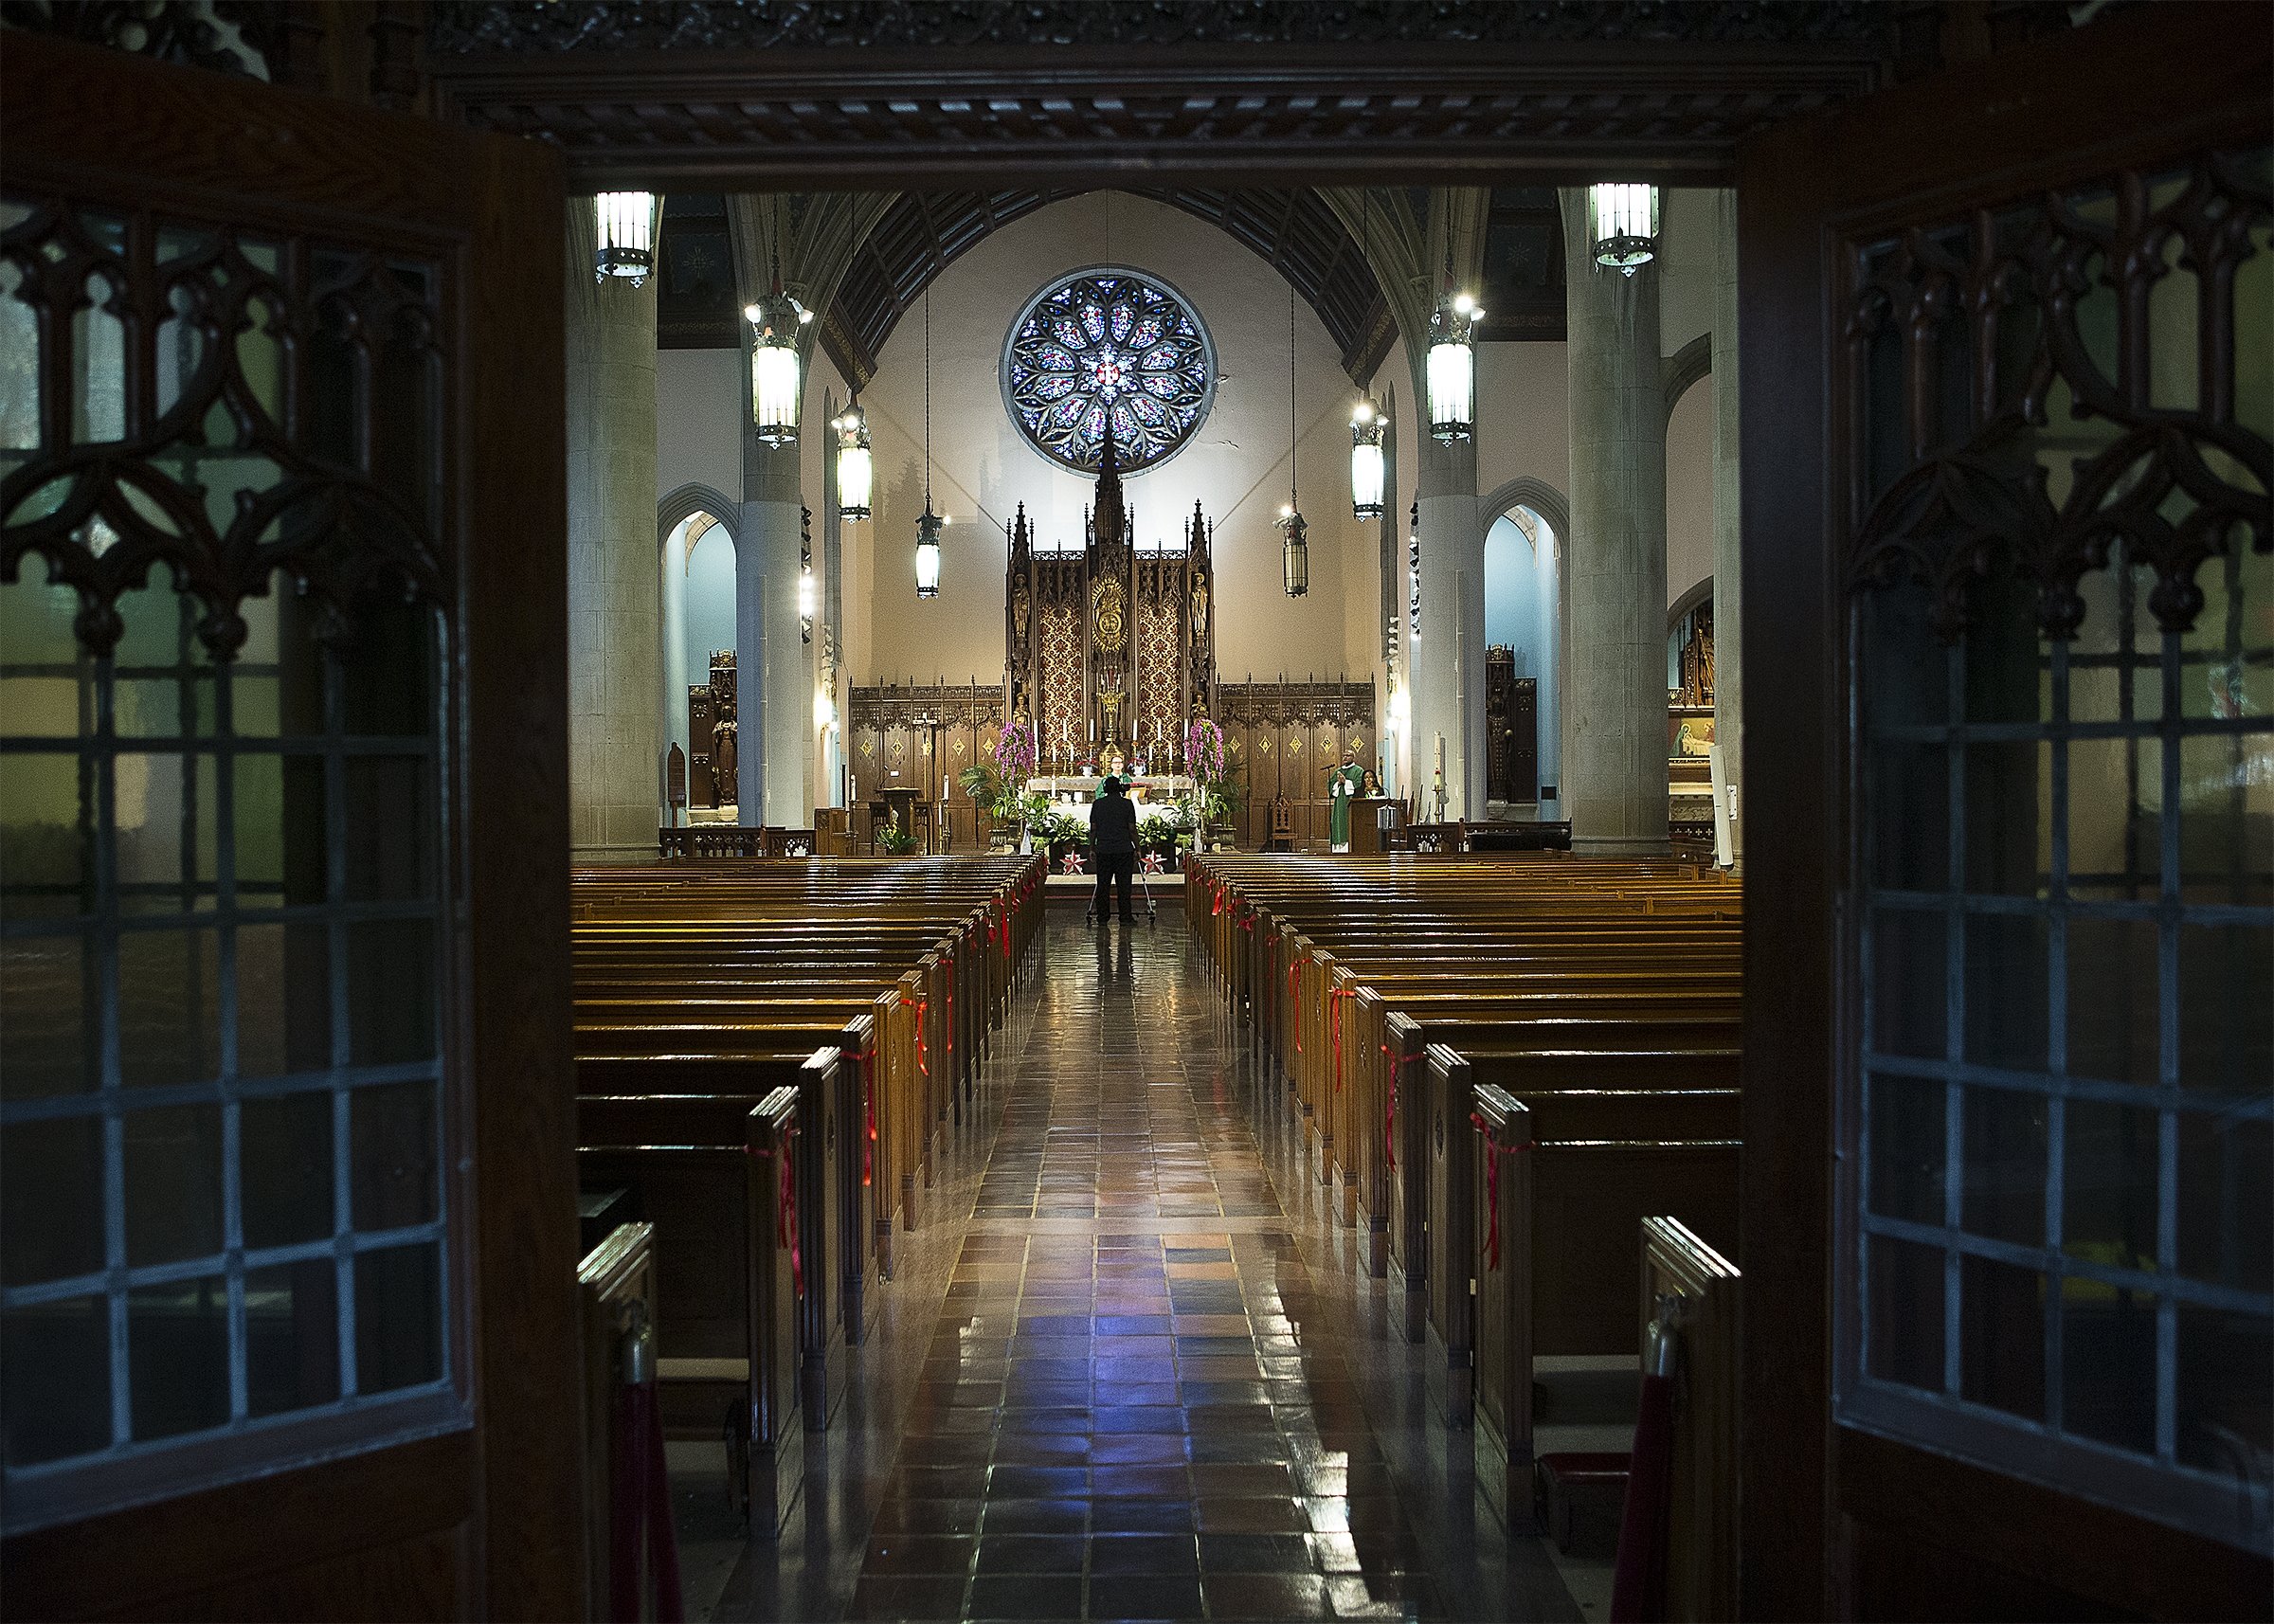 New poll: 36 percent of young Catholics say they will attend Mass less  often after pandemic | America Magazine